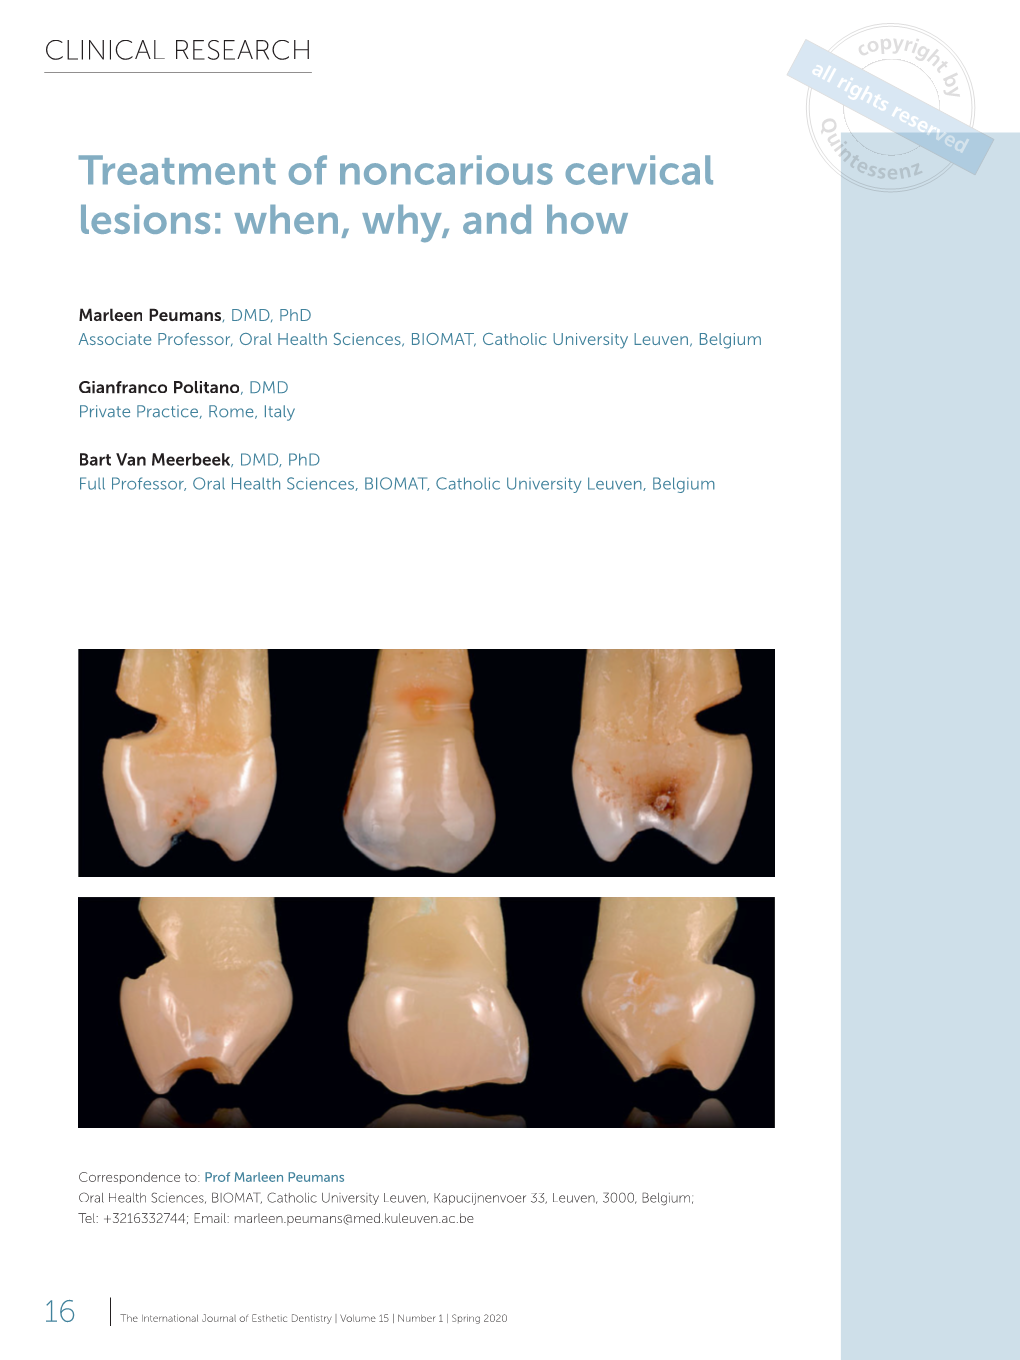 Treatment of Noncarious Cervical Lesions: When, Why, and How